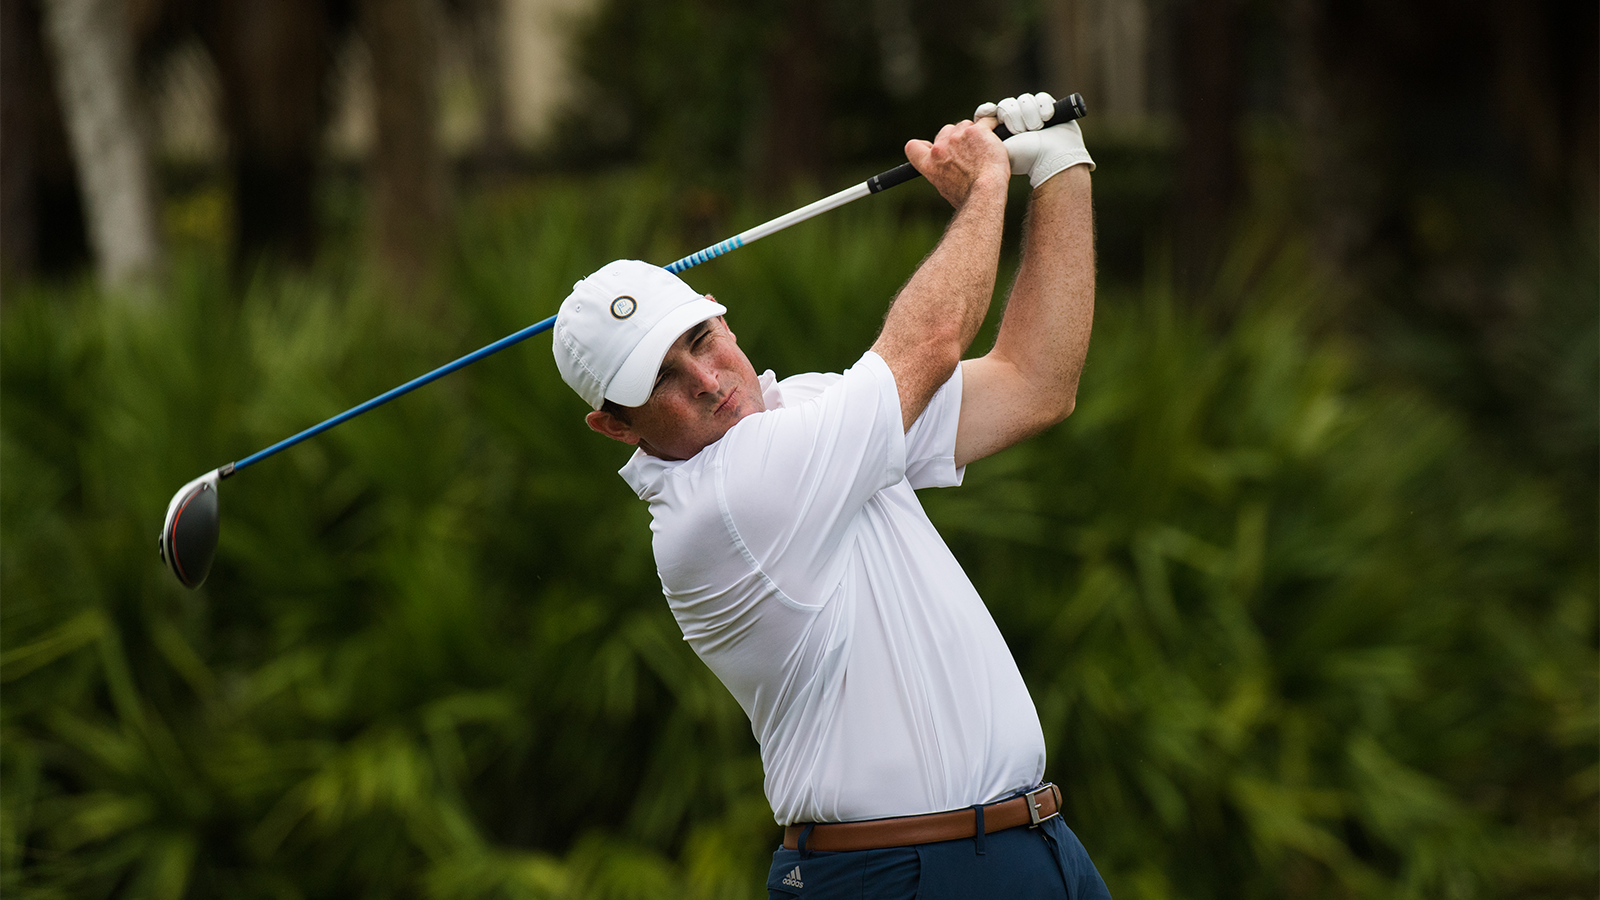 Steve Delmar Wins Playoff To Claim Event No. 6 in PGA Tournament Series